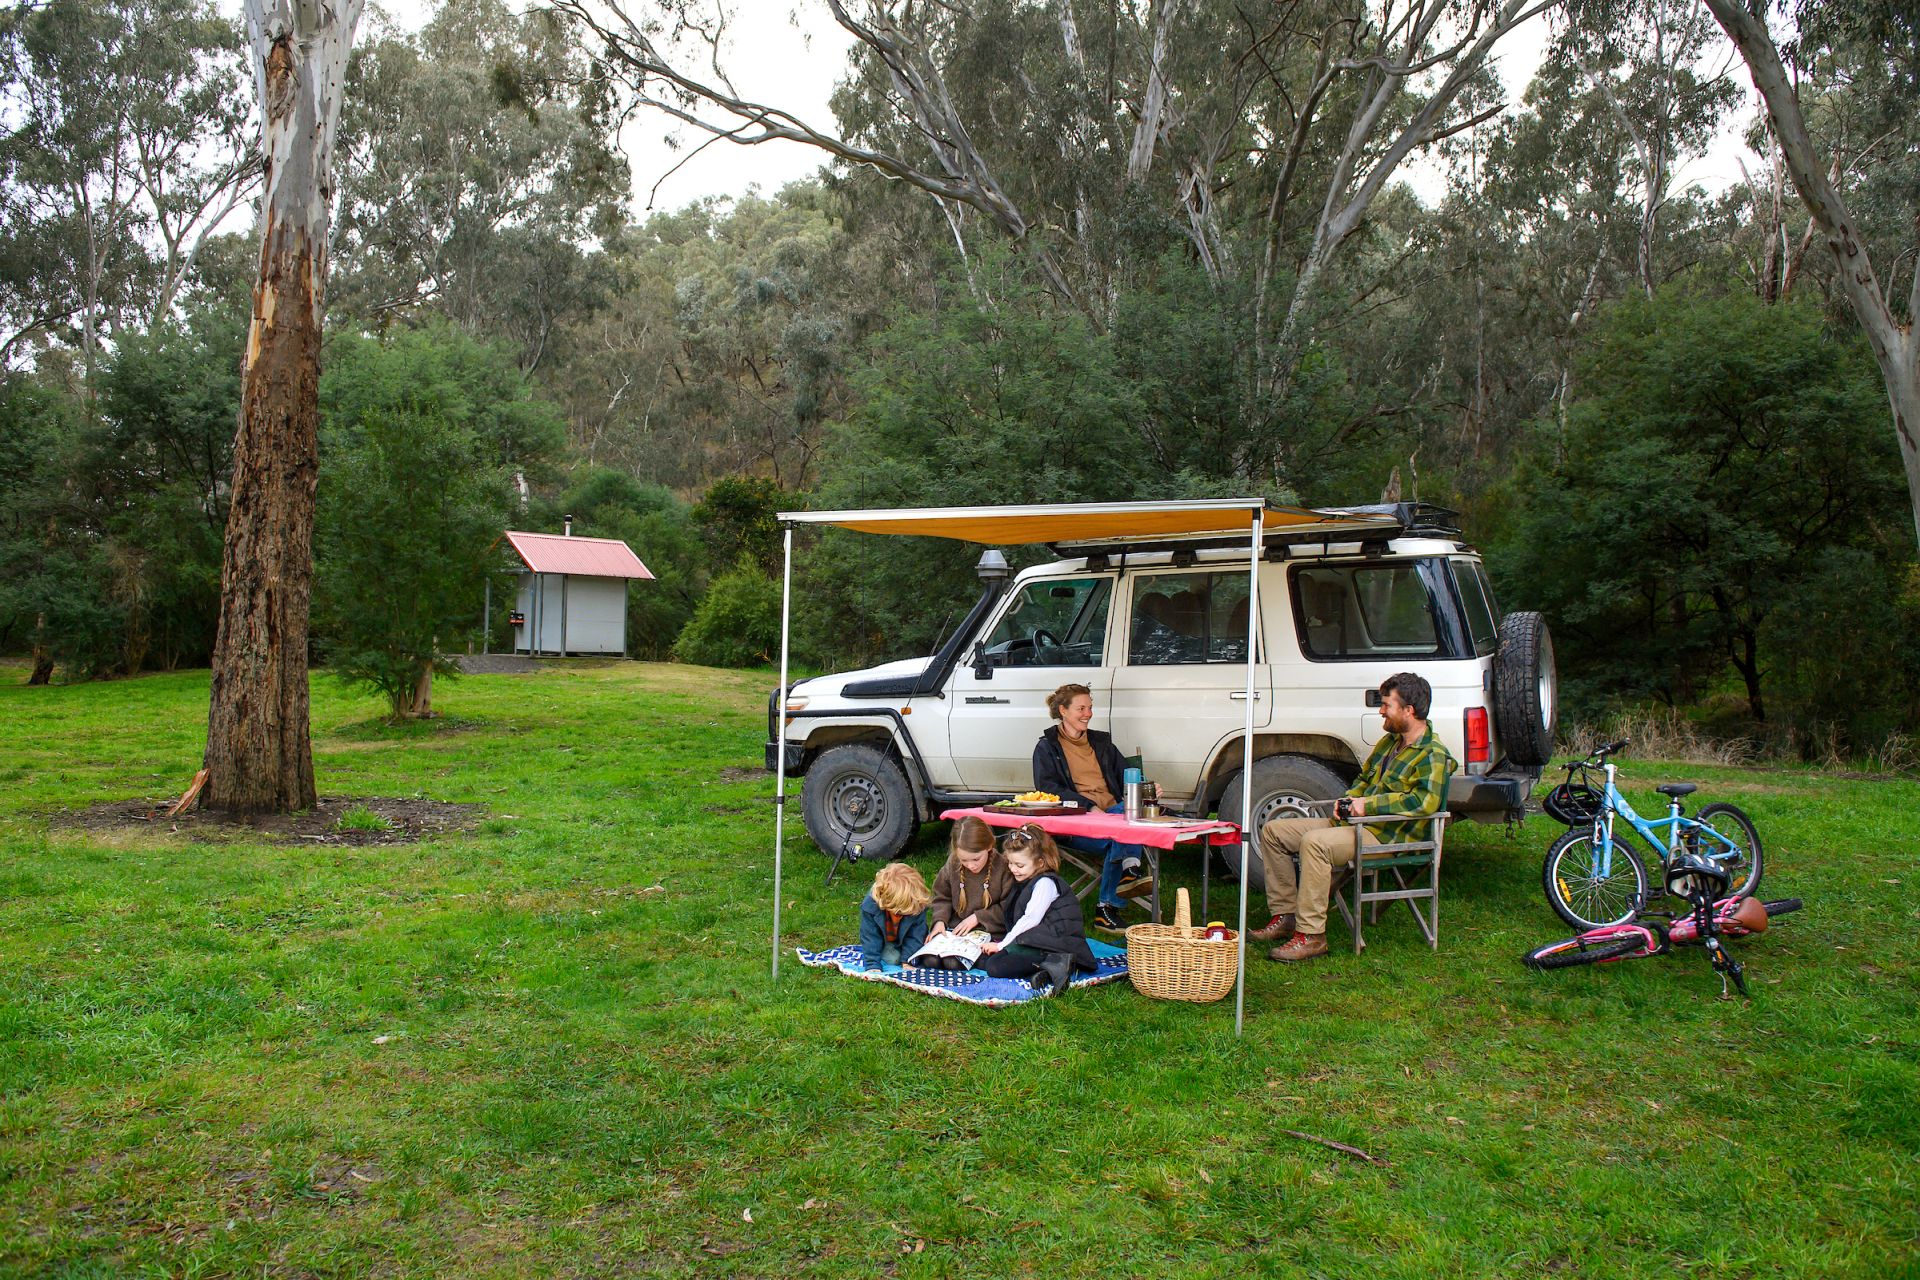 Two adults and three children sitting together smiling in front of a white vehicle at a campground. The campground has green grass and is surrounded by trees, a toilet block is in the background.